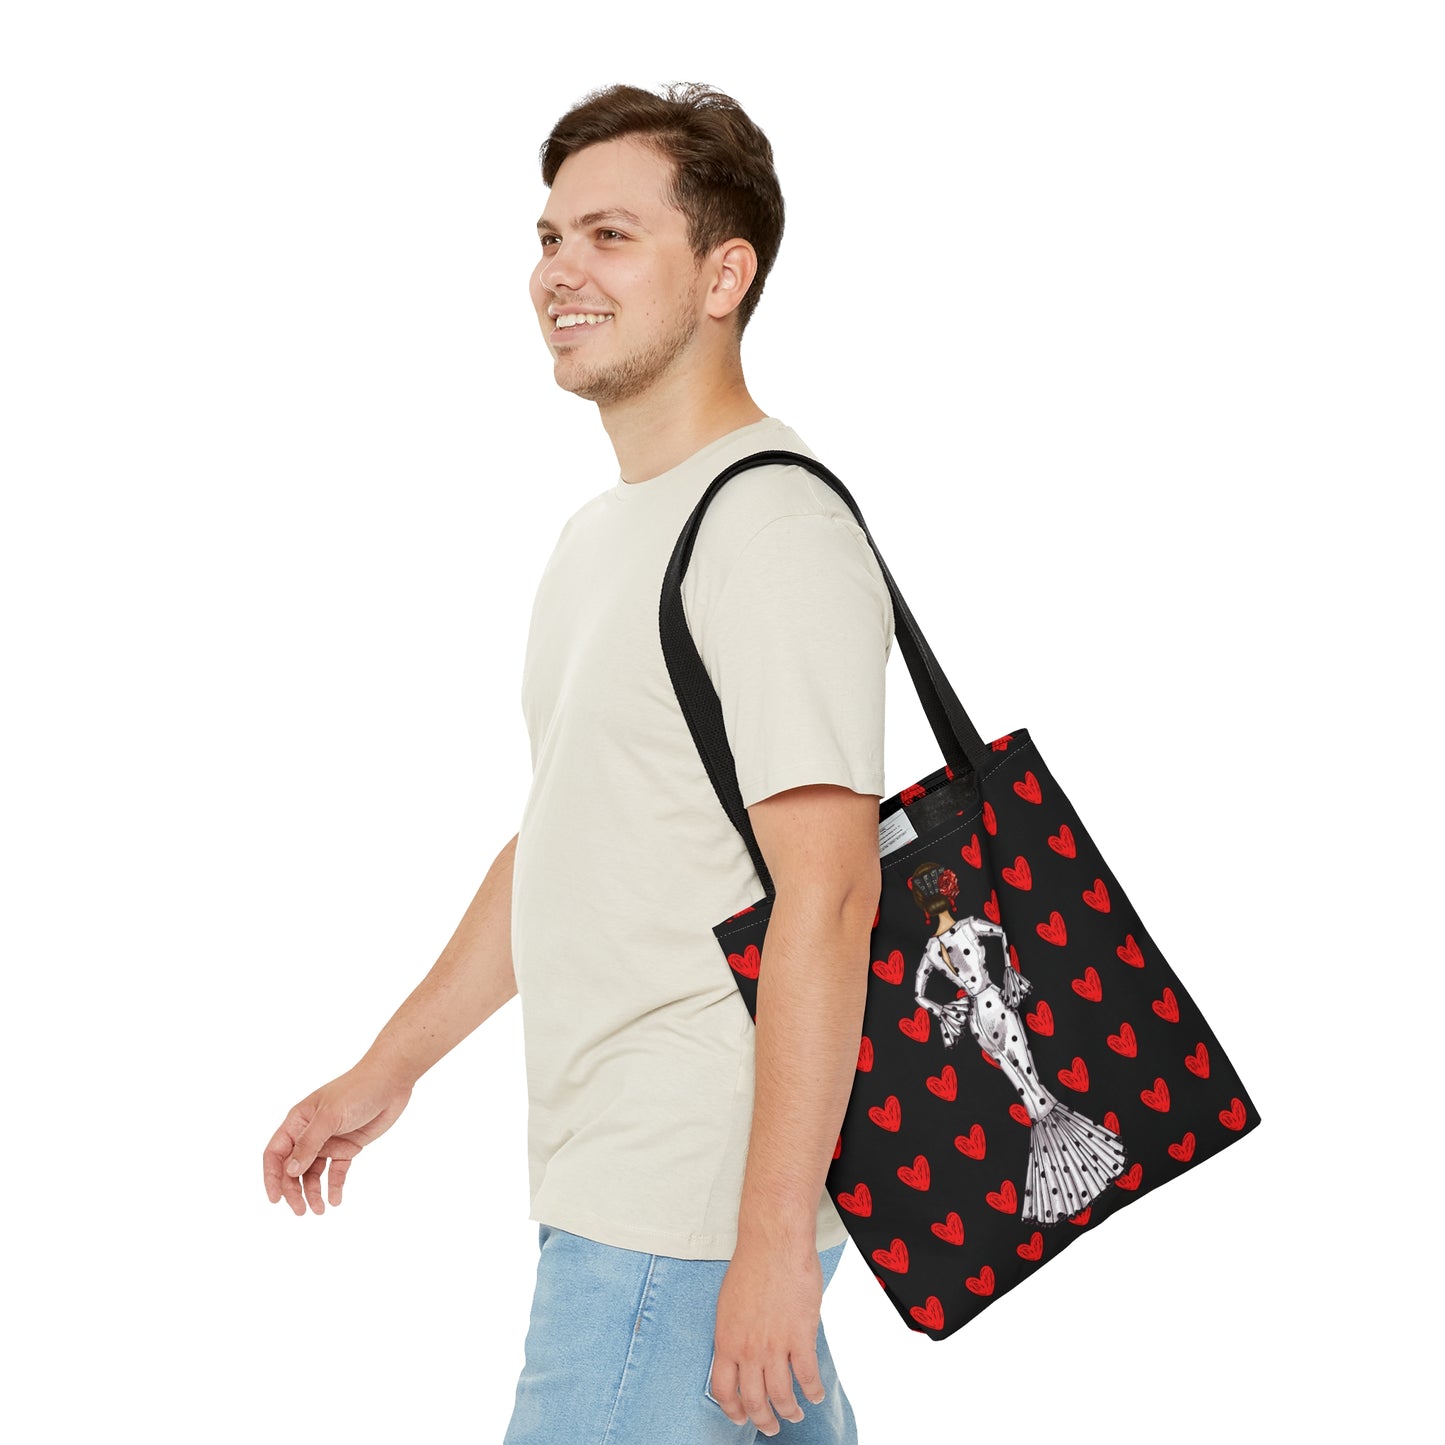 a man carrying a black and red tote bag